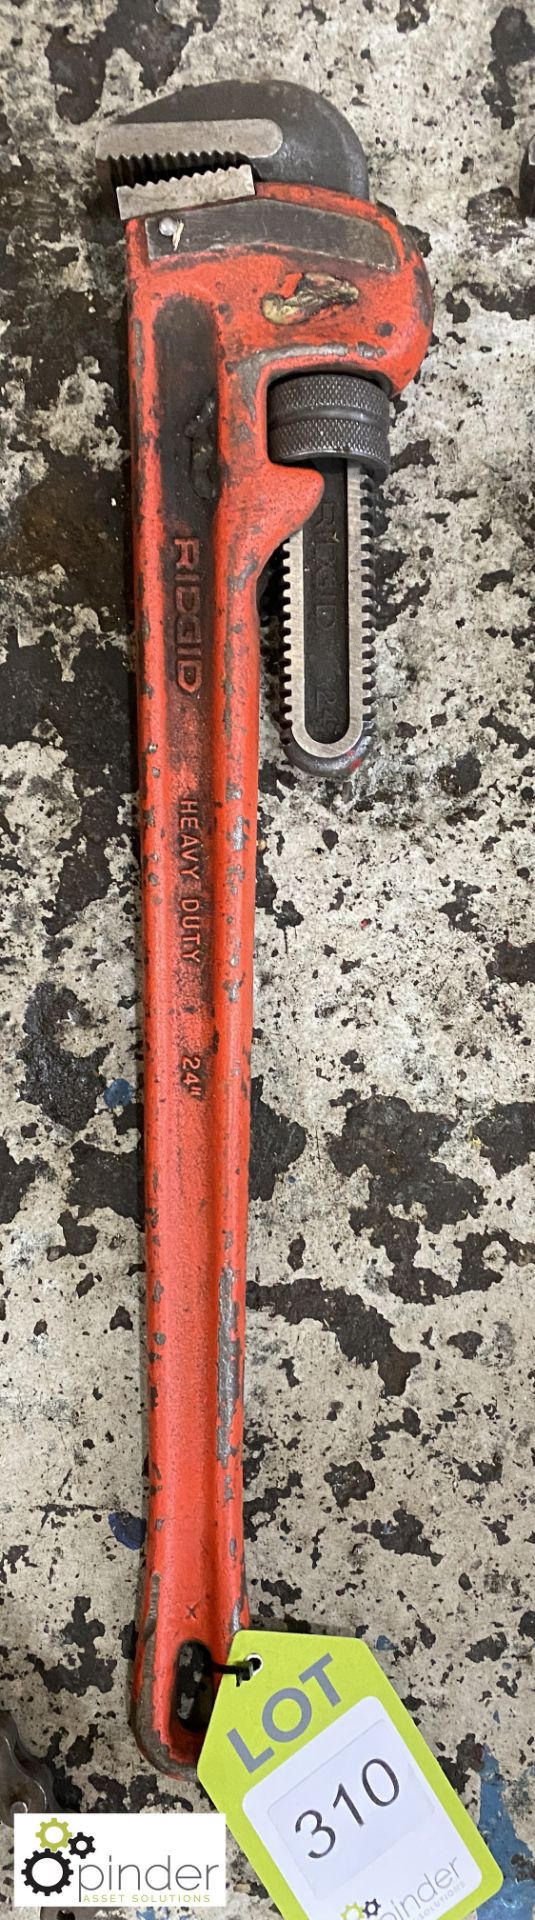 Ridgid Pipe Wrench, 24in